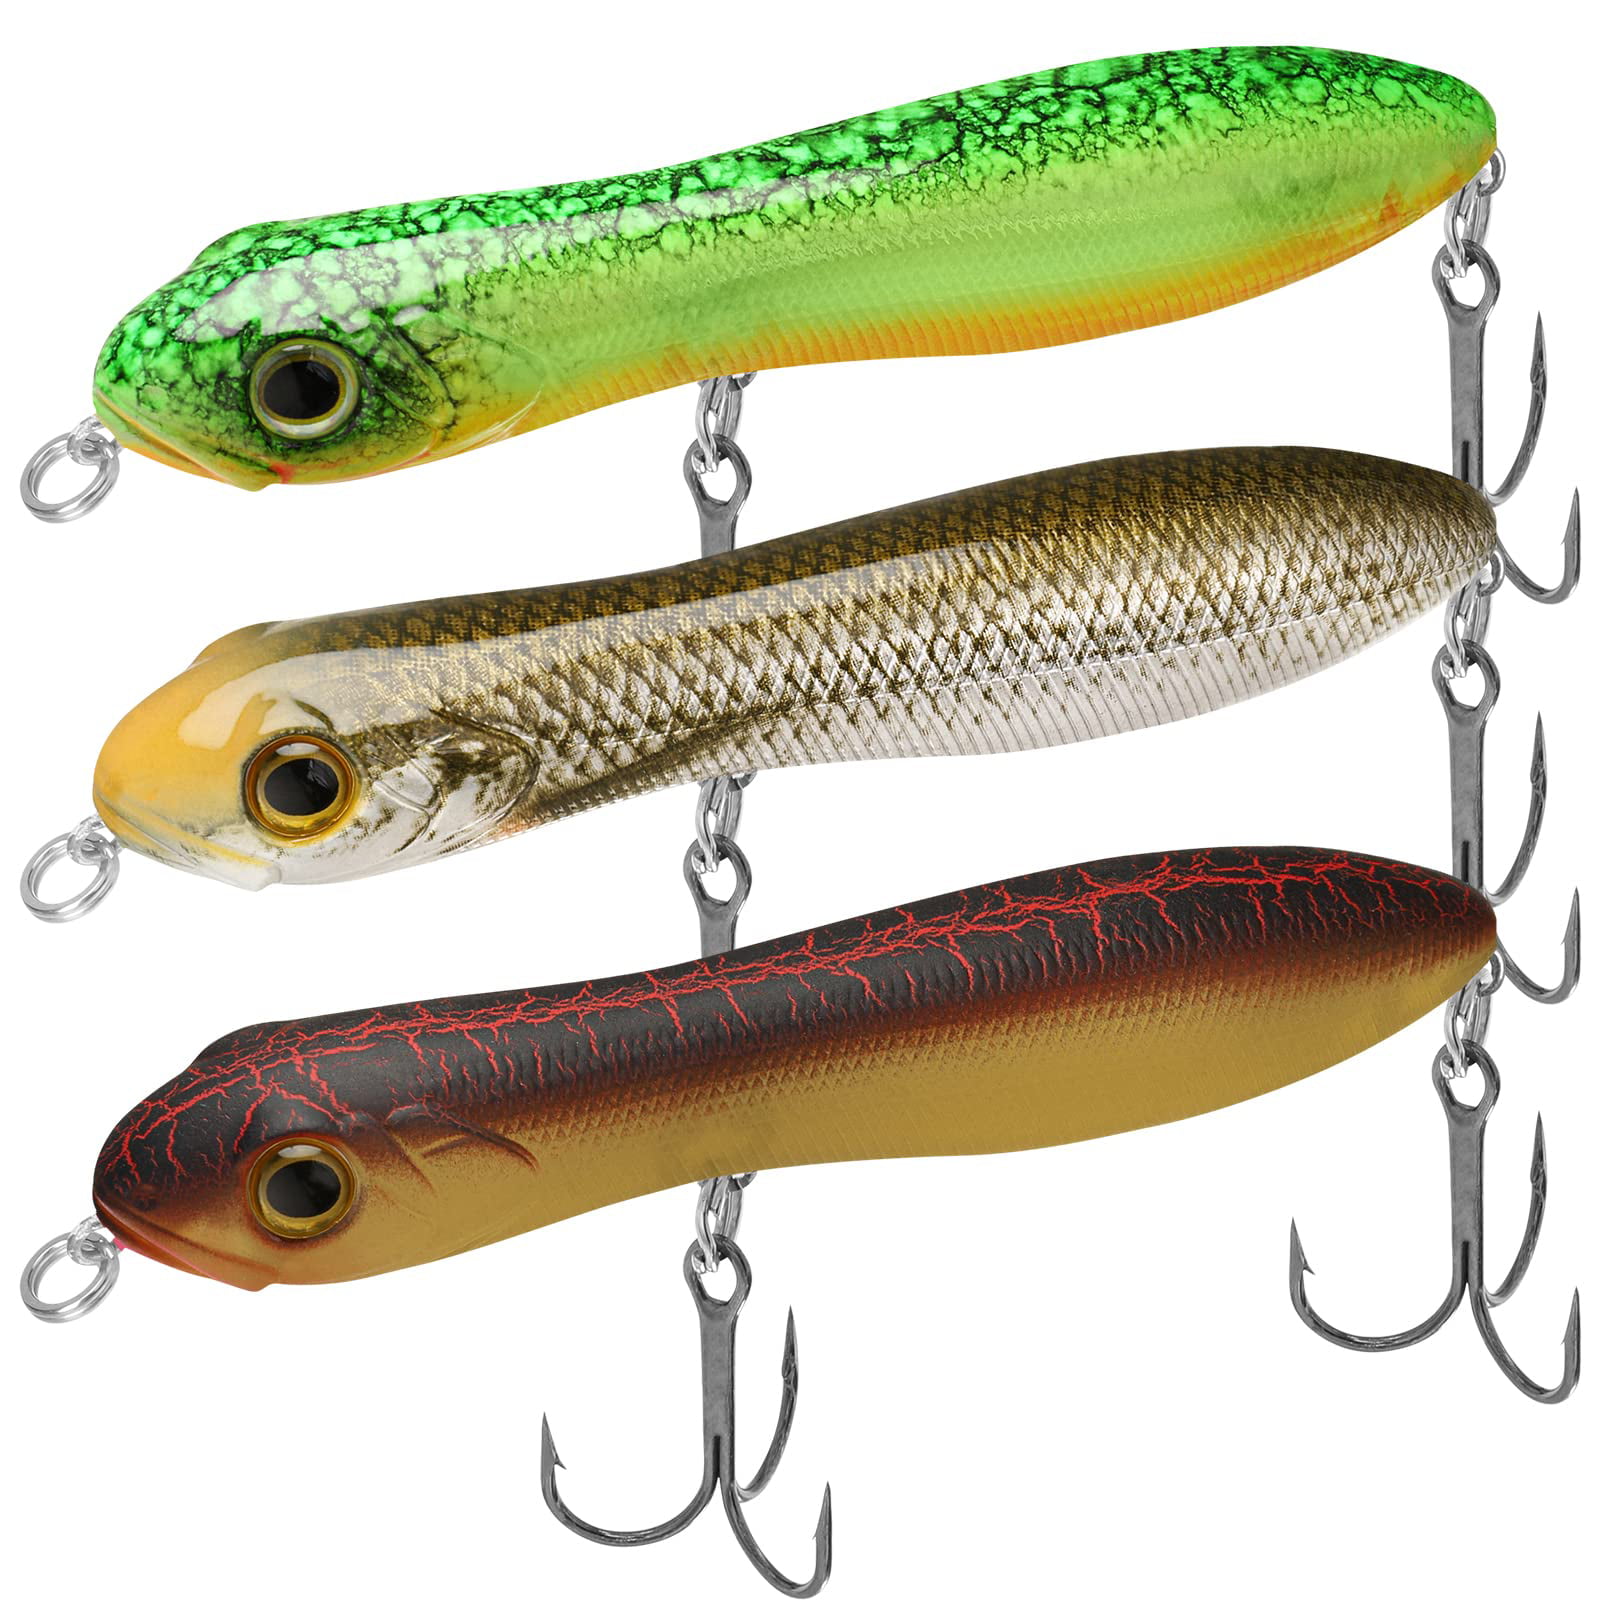 Fishing Lures for Bass Trout, Multi Jointed Swimbaits, Pencil Fishing Lures  with VMC/BKK Hooks, Lifelike Top Water Bass Lures Kit, Long-Cast Topwater Fishing  Lures Freshwater or Saltwater 